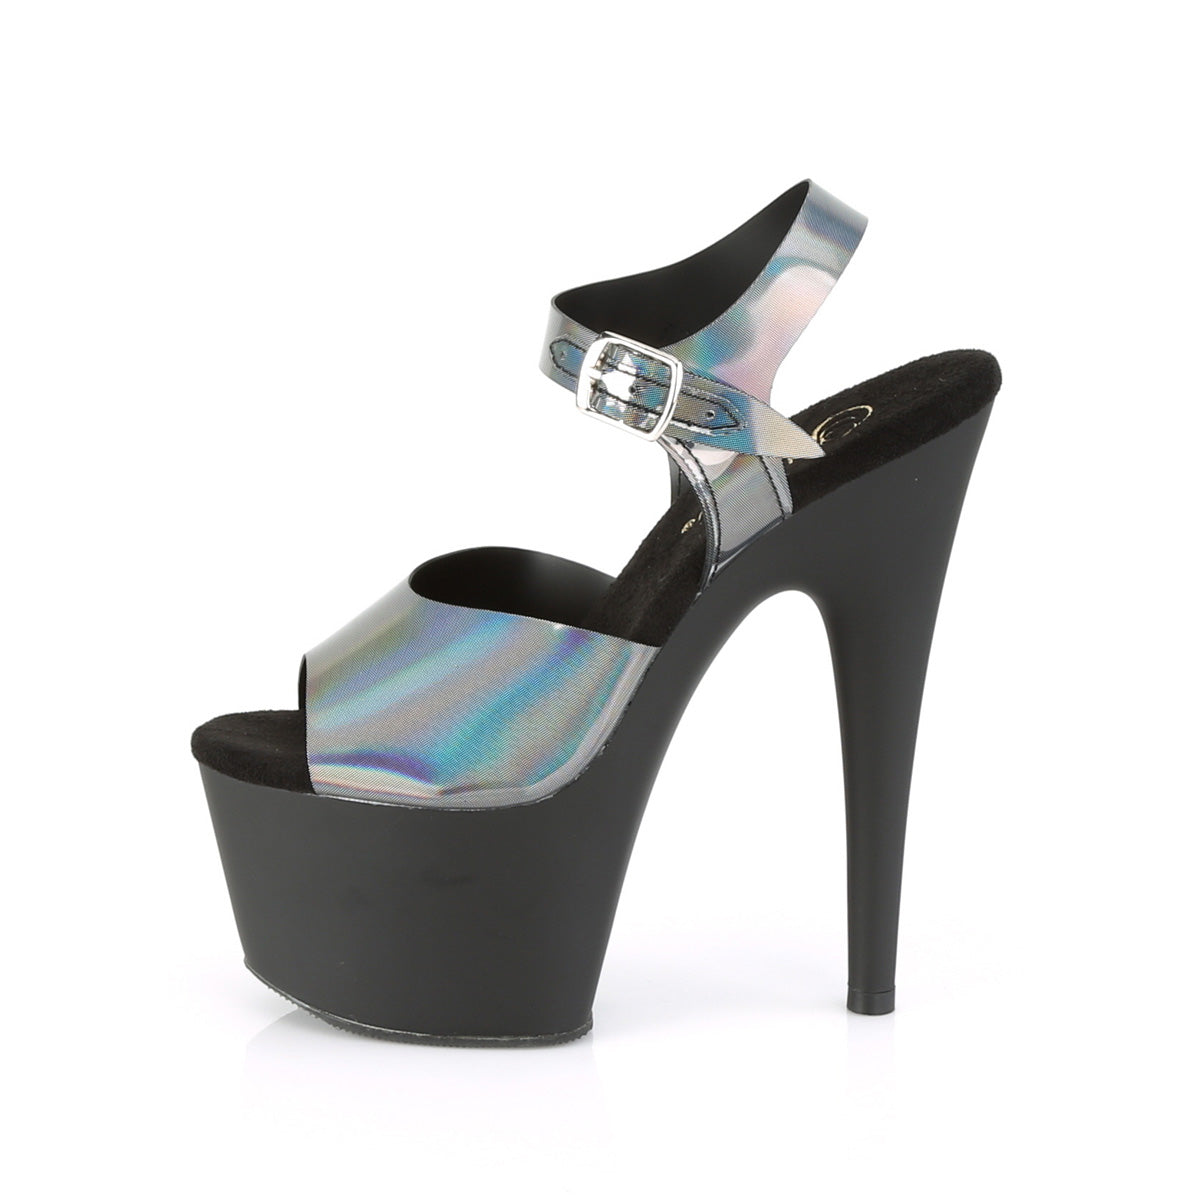 ADORE-708N-DT Pleaser Sexy 7" Heel Pewter Pole Dancer Shoes-Pleaser- Sexy Shoes Pole Dance Heels